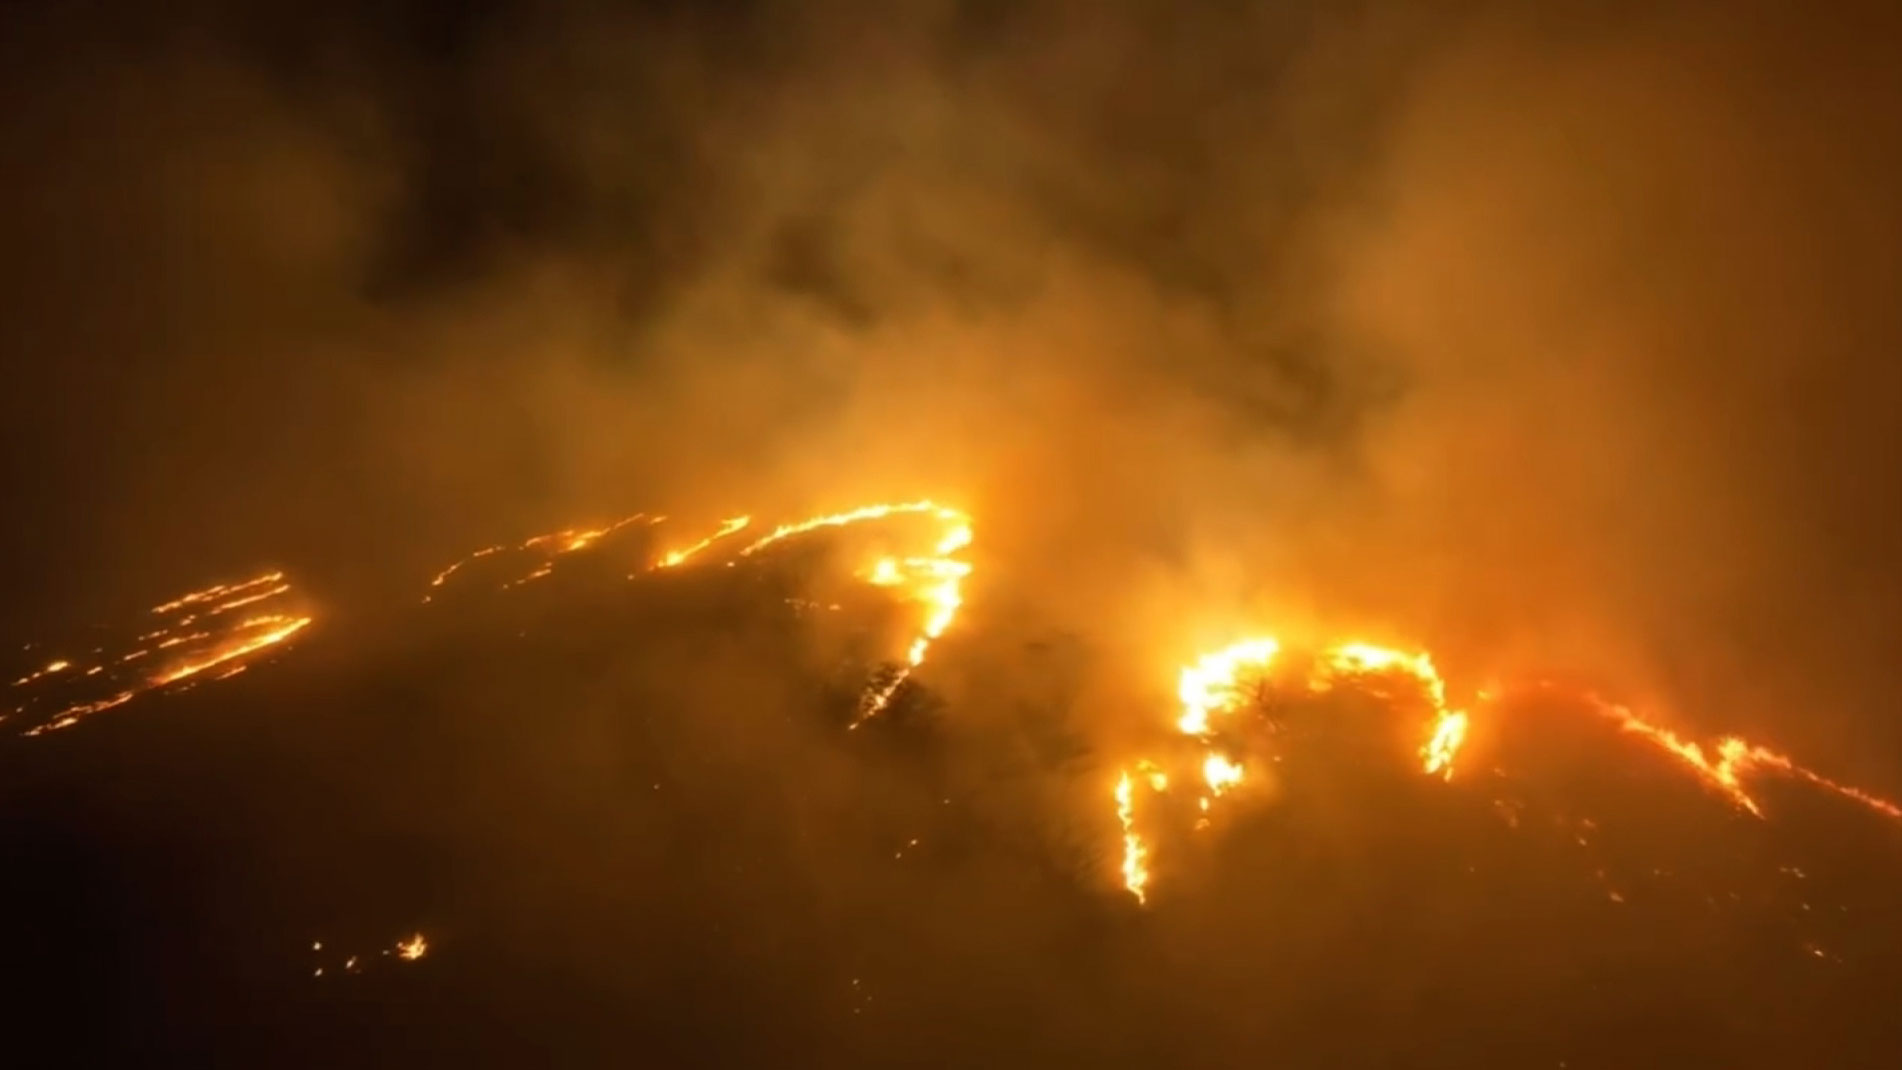 Clint Hansen took drone video at 11:30 pm on August 8 that shows wildfires spreading across just north of Kihei.